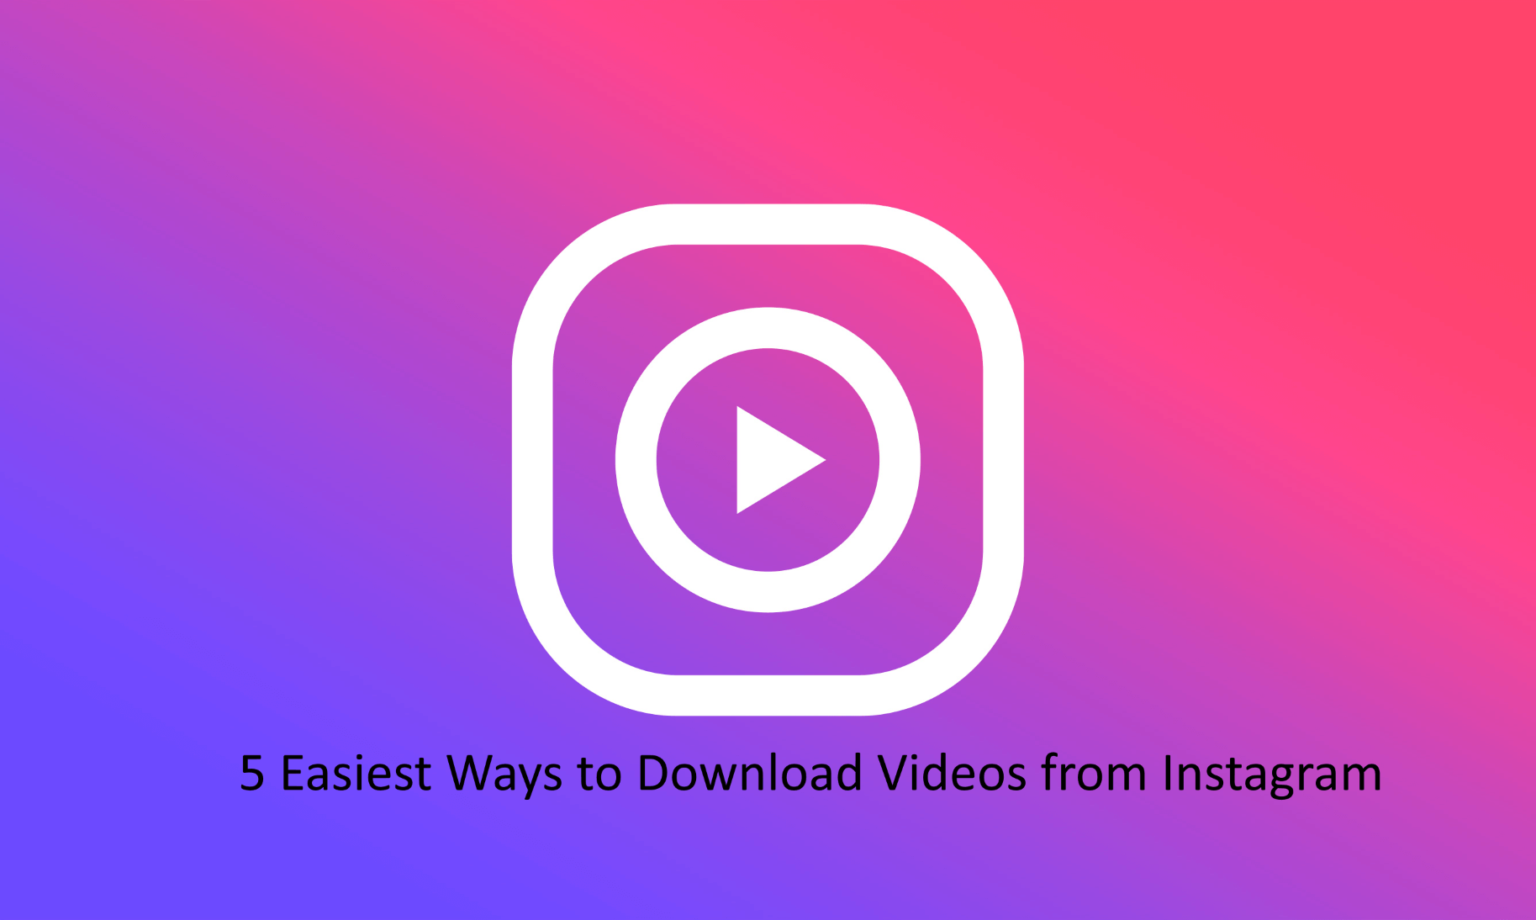 Free Your Videos: Instagram Video Downloader Free And Simple